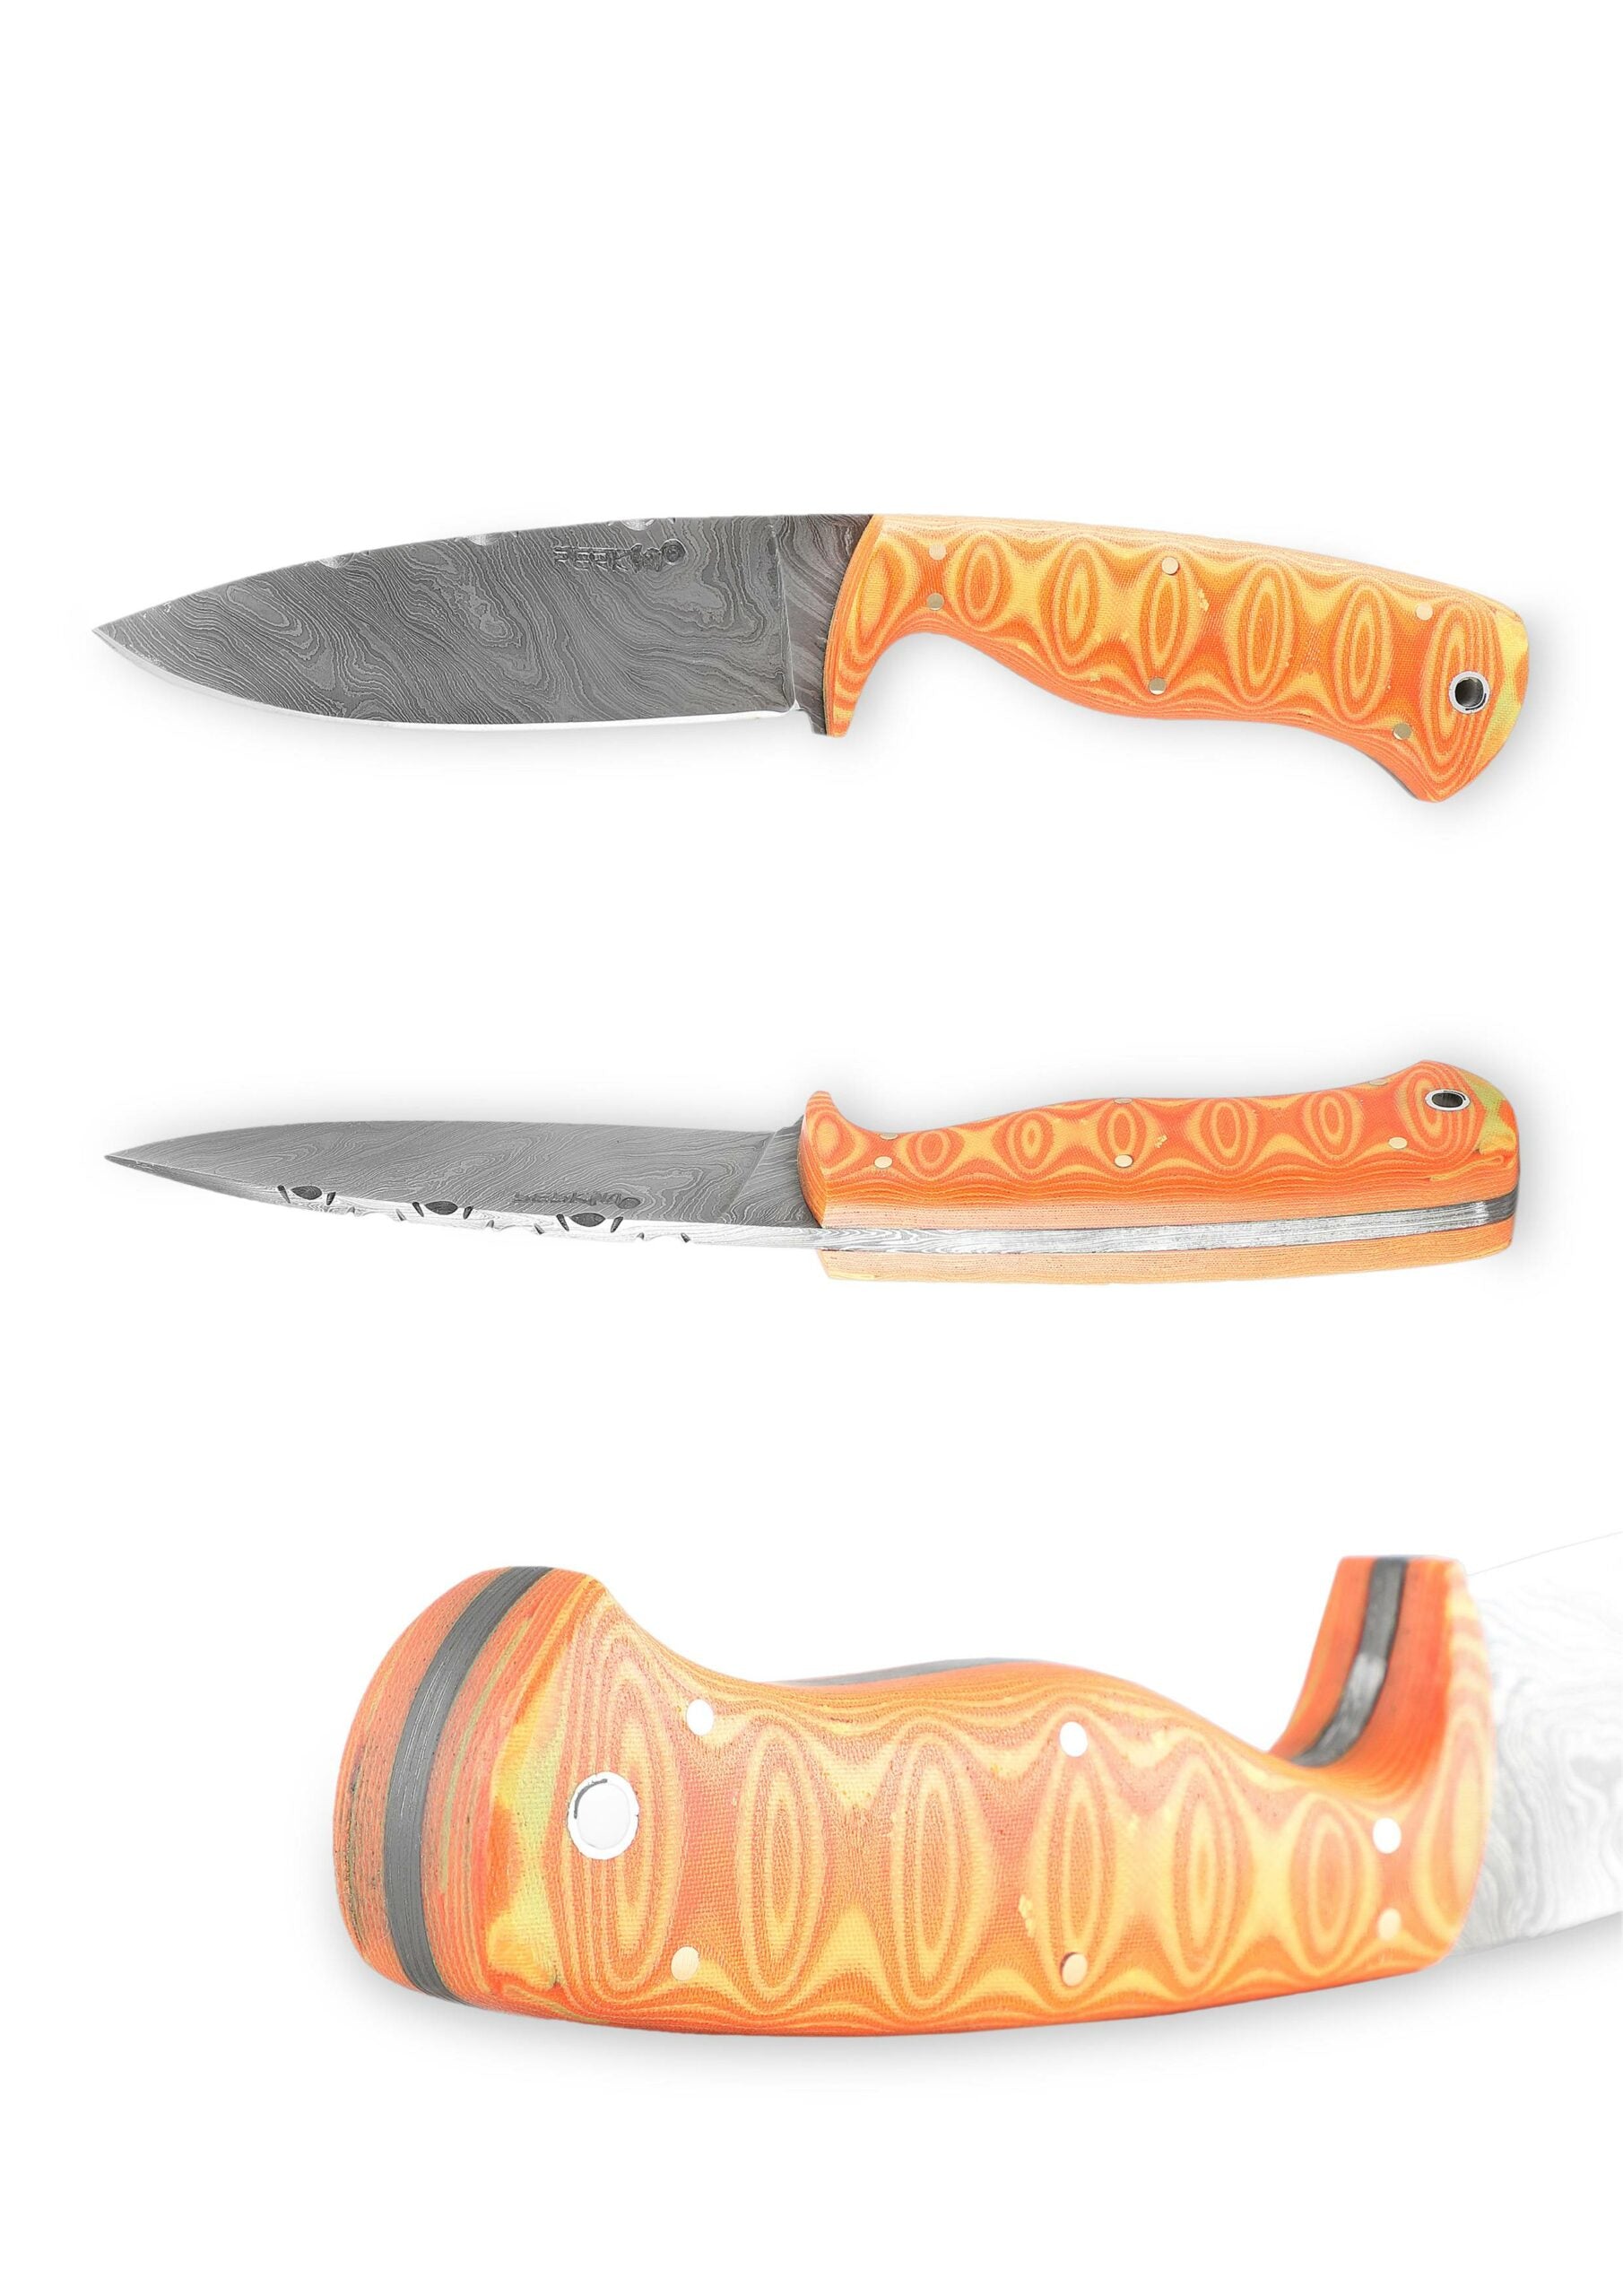 9.5 Inches Full Tang Fixed Blade Hunting Knife